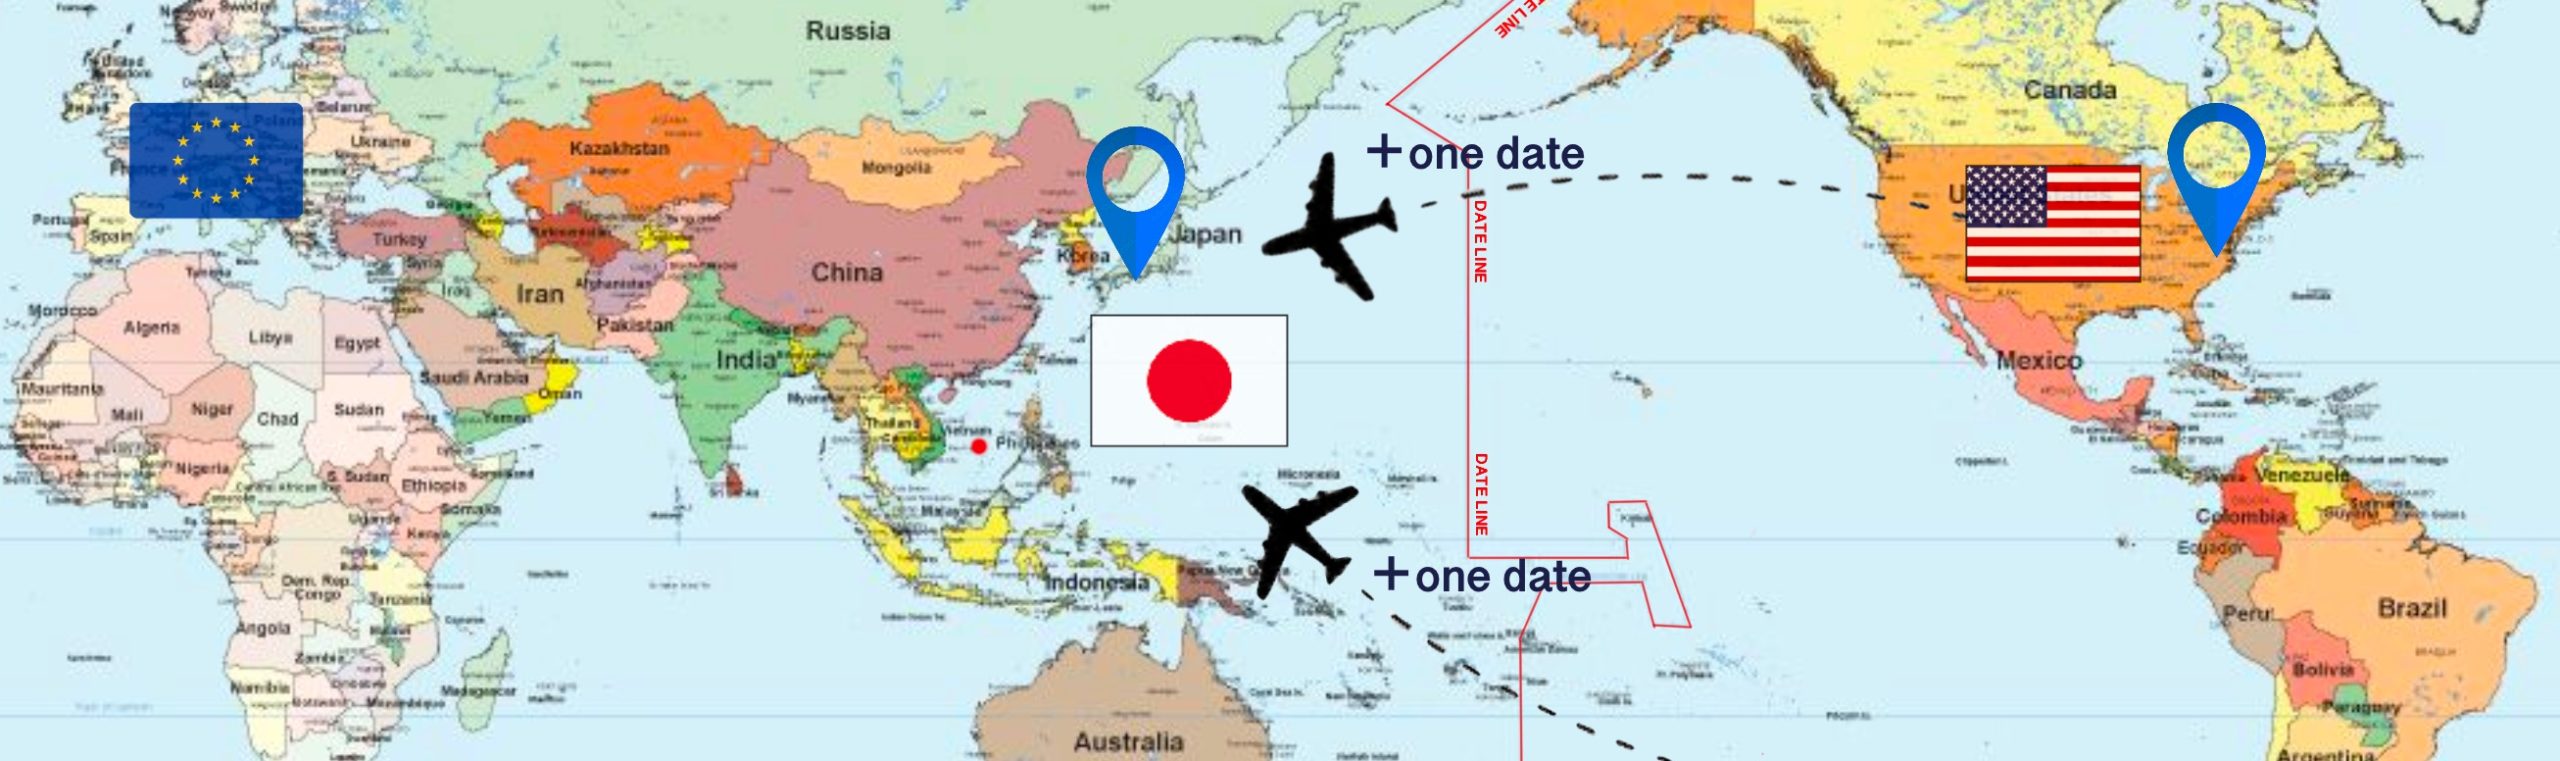 Please note : Coming to Japan from the Americas, you will be crossing the International Date Line. Please check the date of arrival at Narita International airport or Tokyo Haneda airport in Japan on your airline ticket. Your driver will be waiting in the airport lobby until your arrival on the date you specify.